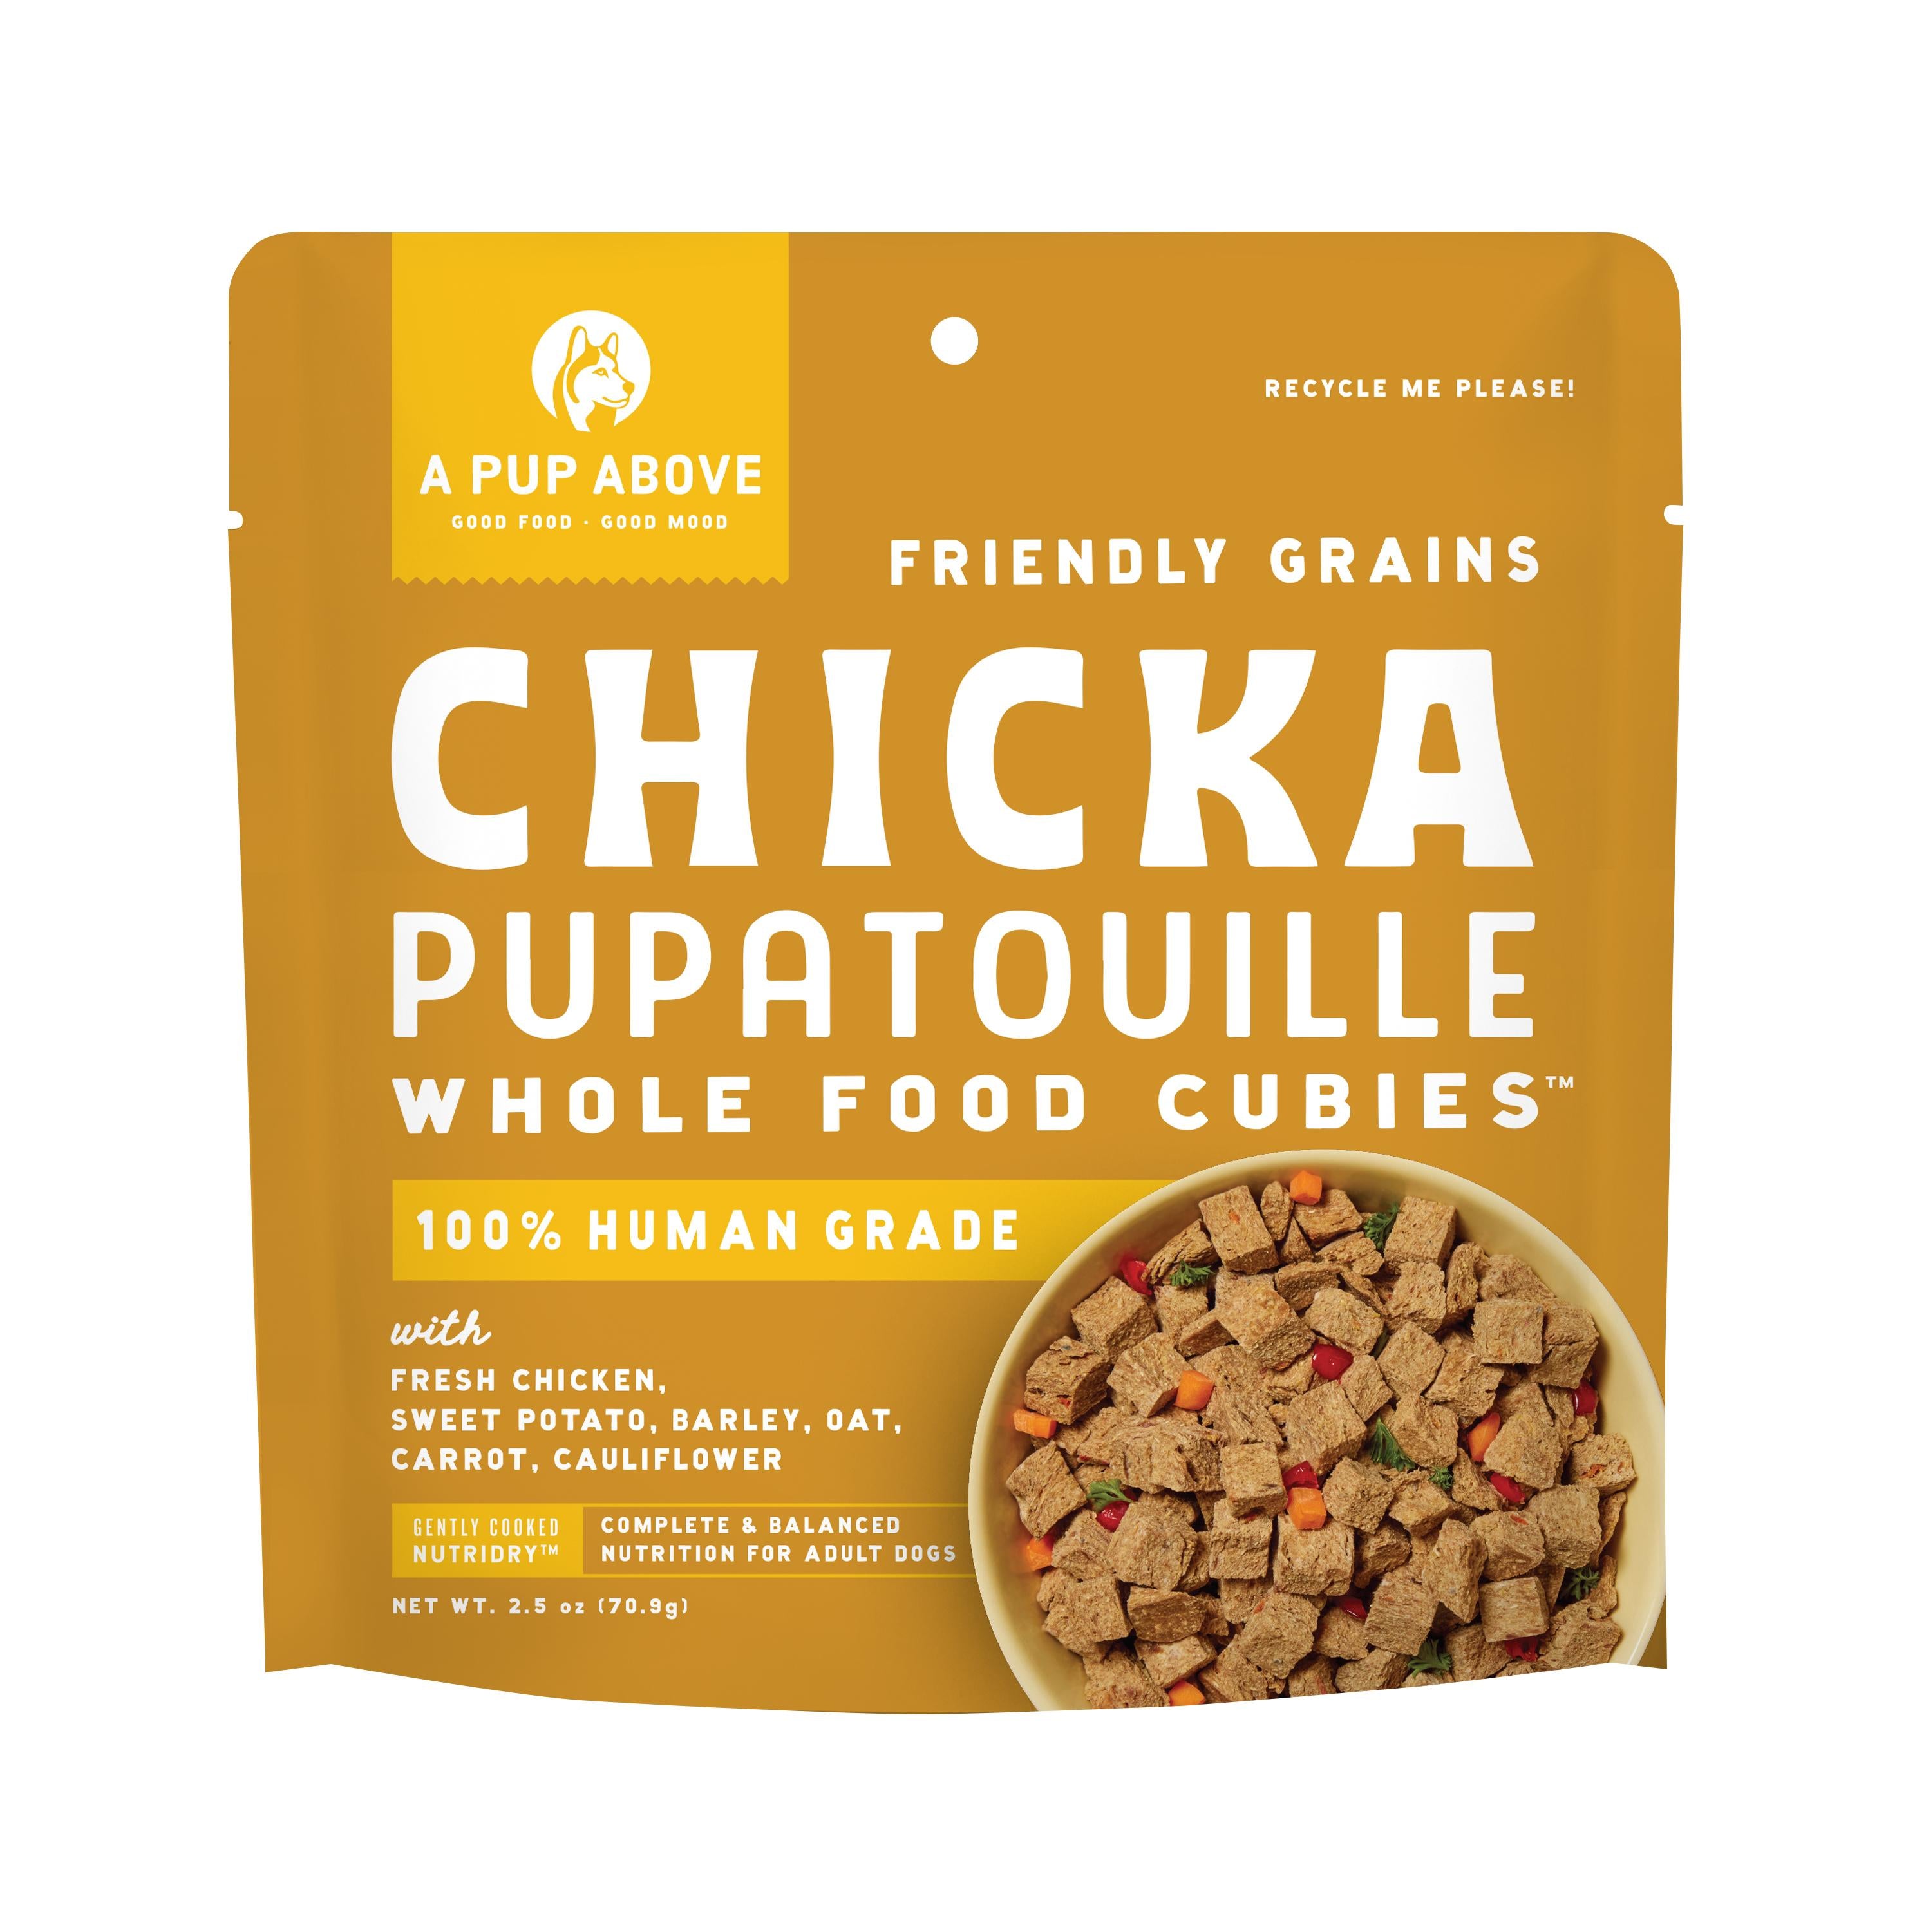 A Pup Above Whole Food Cubies Chicka Pupatouille Dry Dog Food